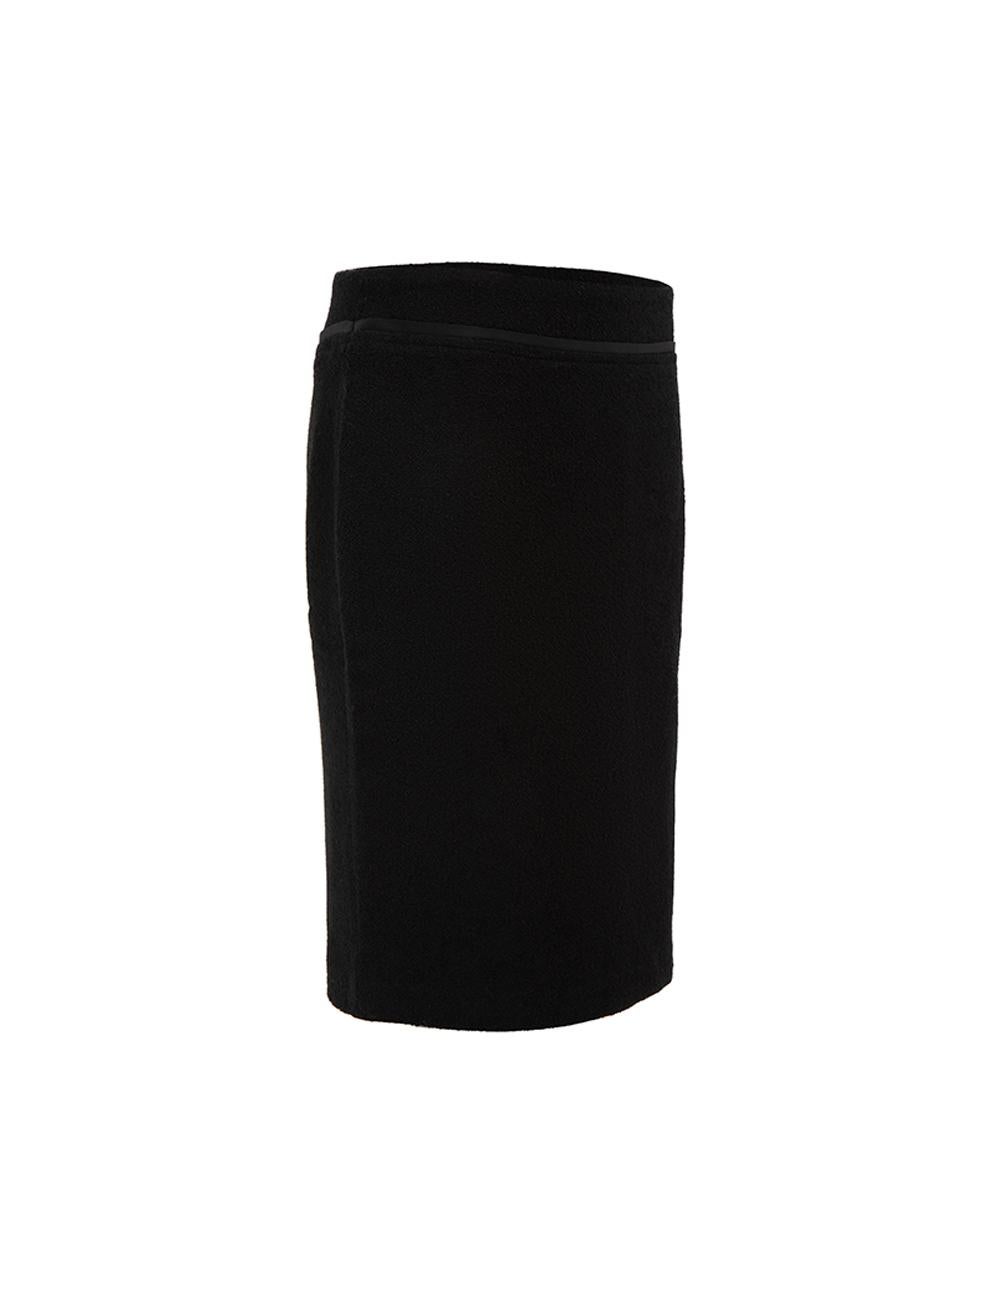 CONDITION is Very good. Minimal wear to skirt is evident. Minimal wear to the outer mixed fabric and there are few loose threads on this used Versace designer resale item. 
 
 Details
 Black
 Cotton
 Pencil skirt
 Mini length
 Textured
 Side zip